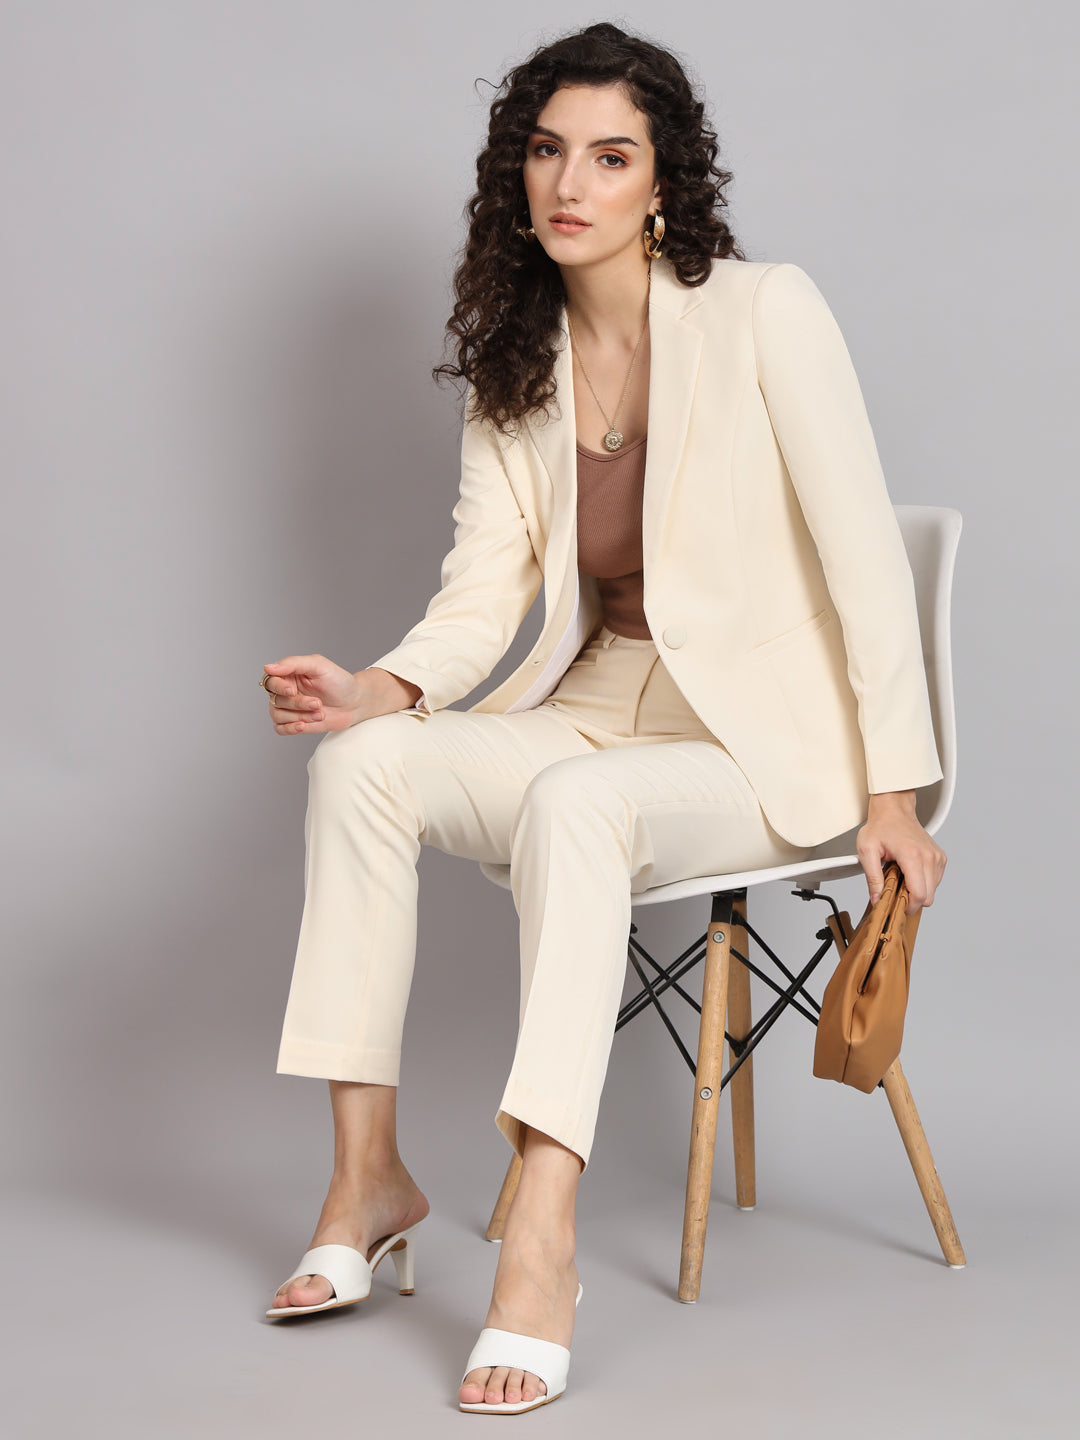 Off-White Polyester Notch Collar Stretch Pant Suit